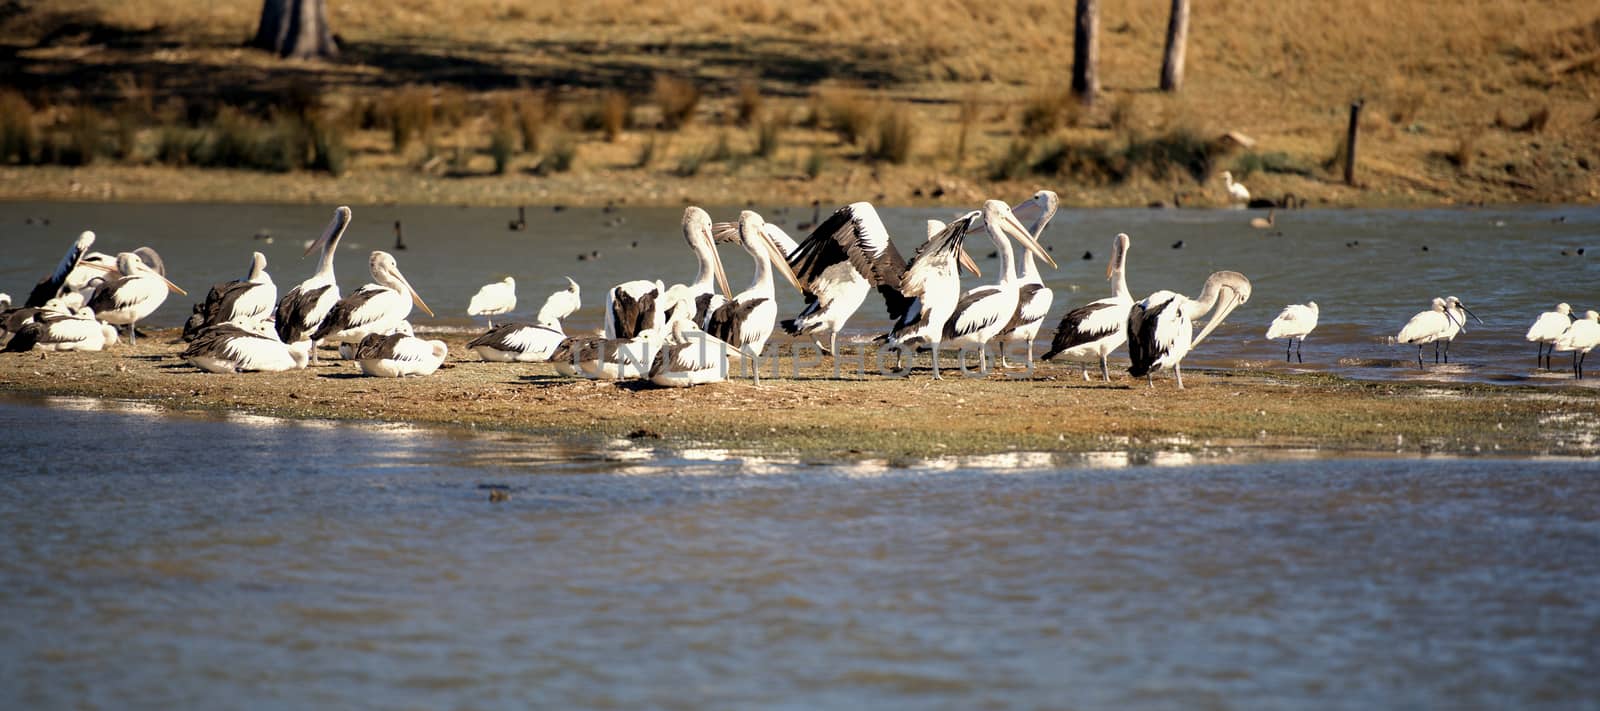 Pelicans resting by the lake by artistrobd